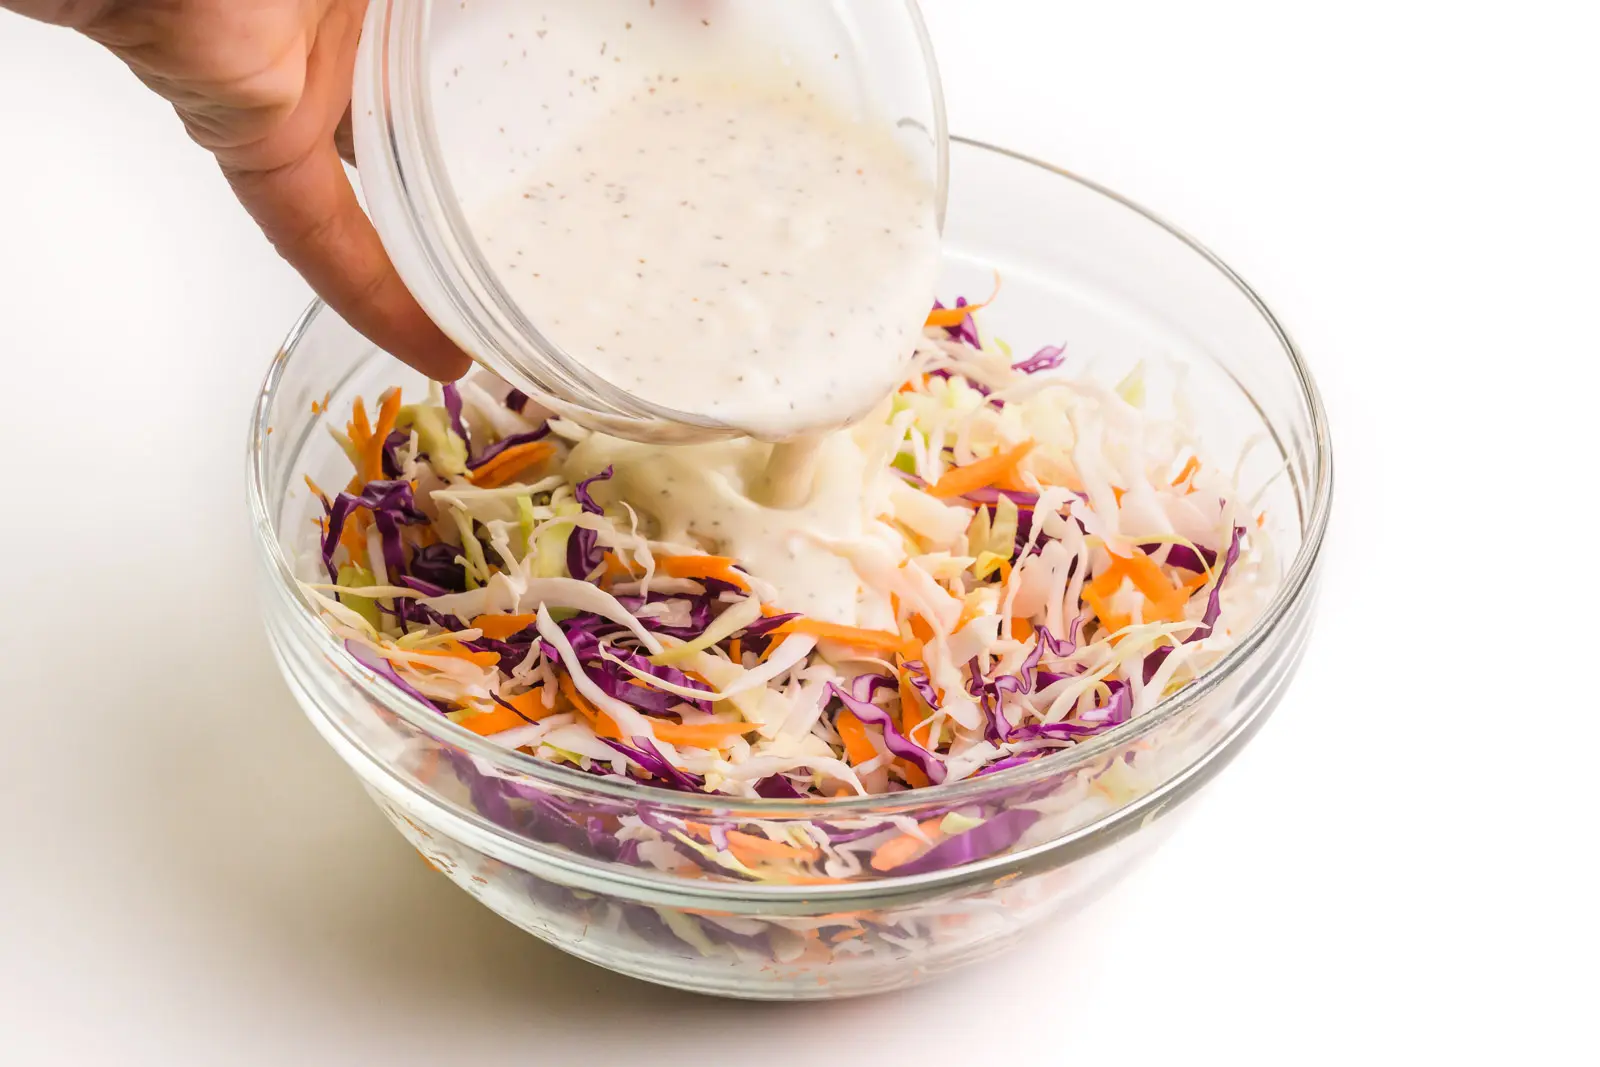 A hand holds a bowl of sauce pouring it over shredded cabbage and carrots.